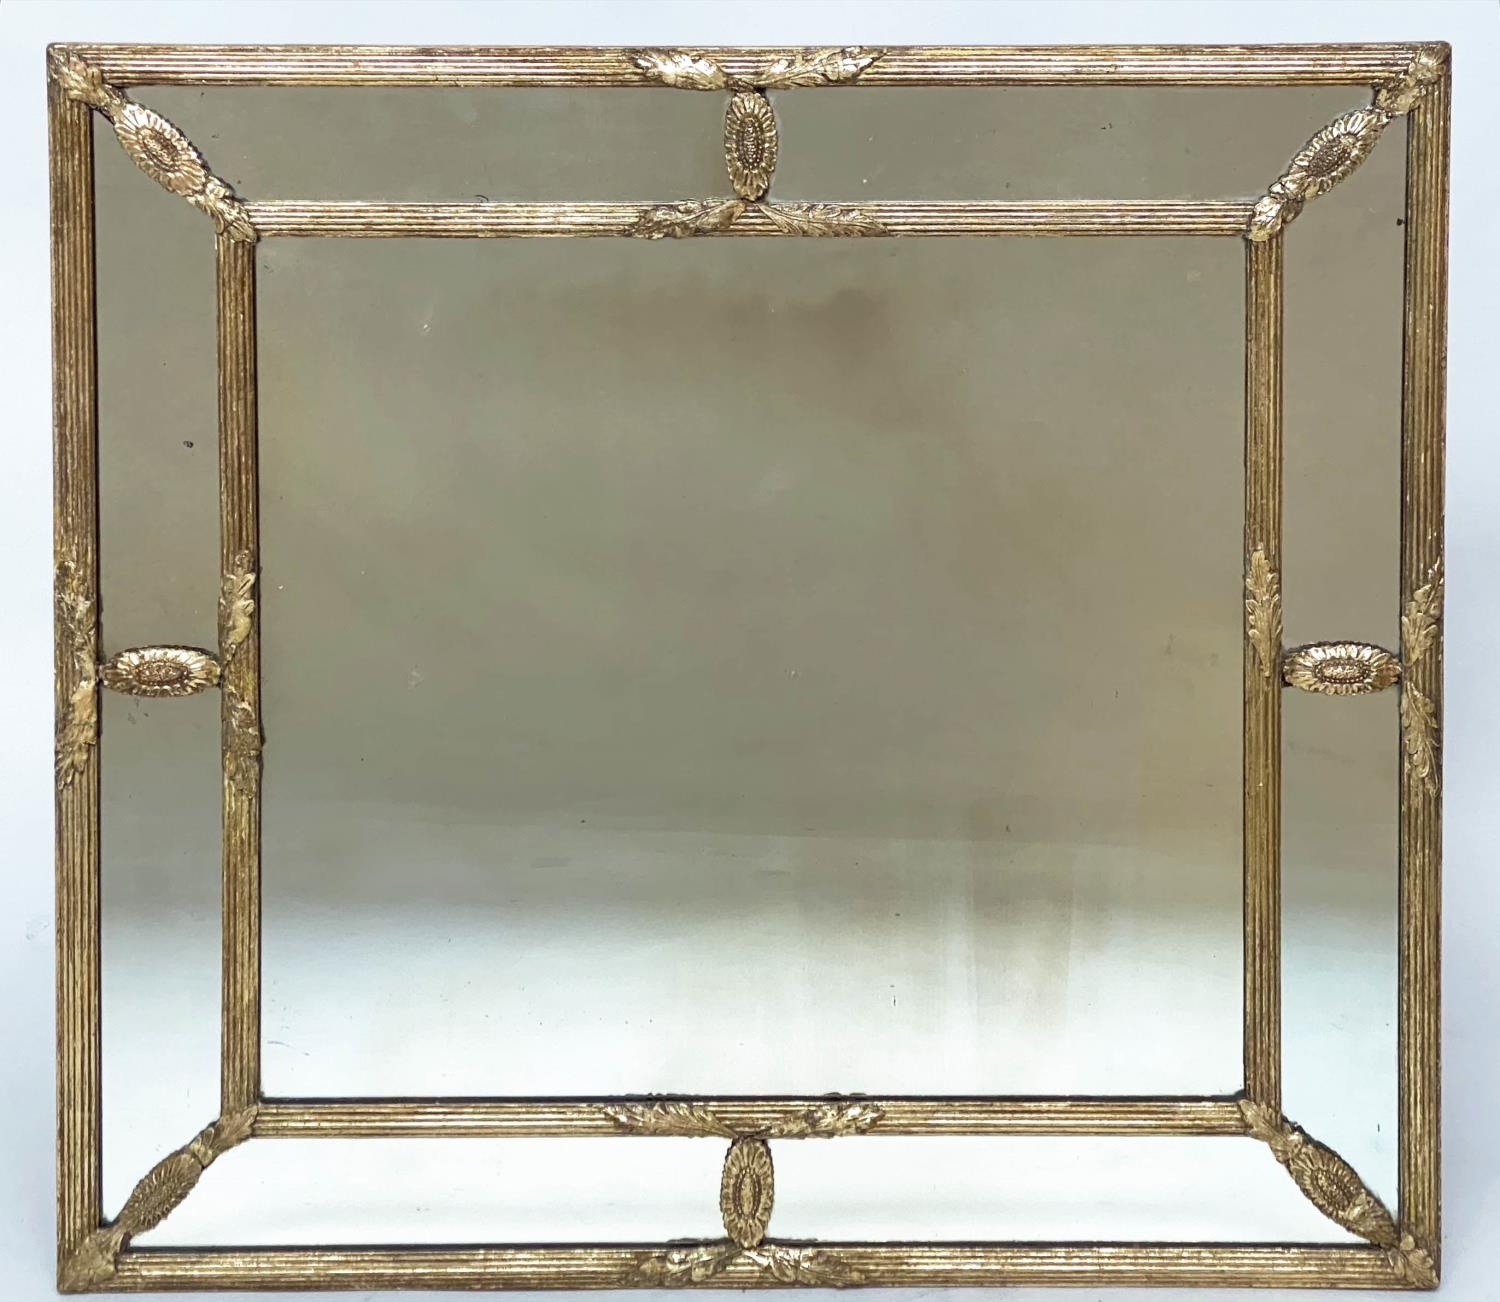 WALL MIRROR, early 20th century Regency style giltwood and gesso rectangular with reeded frame and - Image 2 of 6